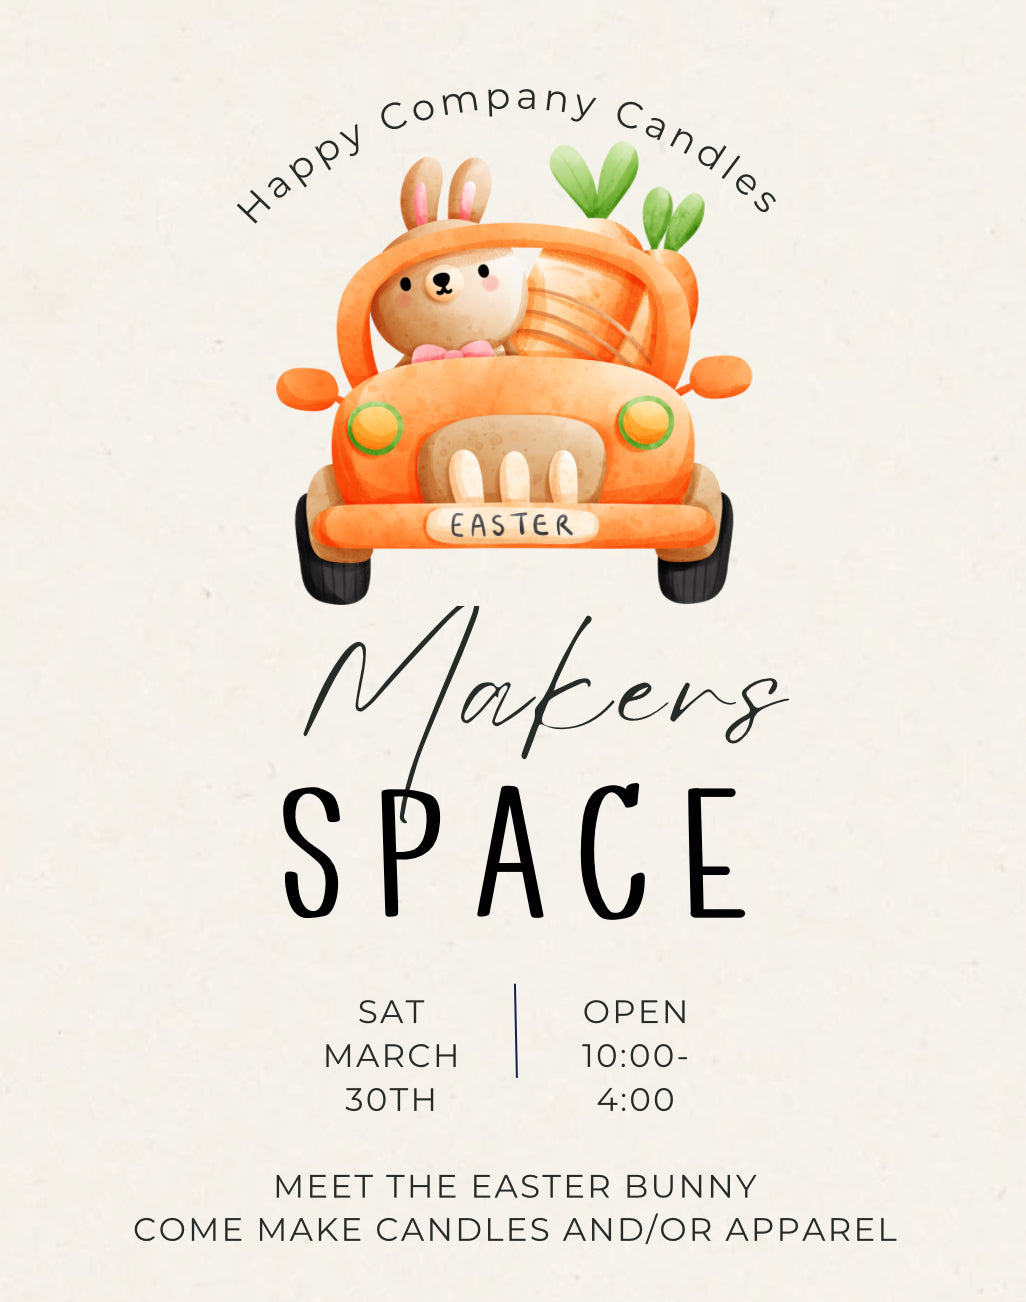 Easter Bunny Visiting—> Makers Space (Candle Making &/or Apparel Making) on Saturday 3/30